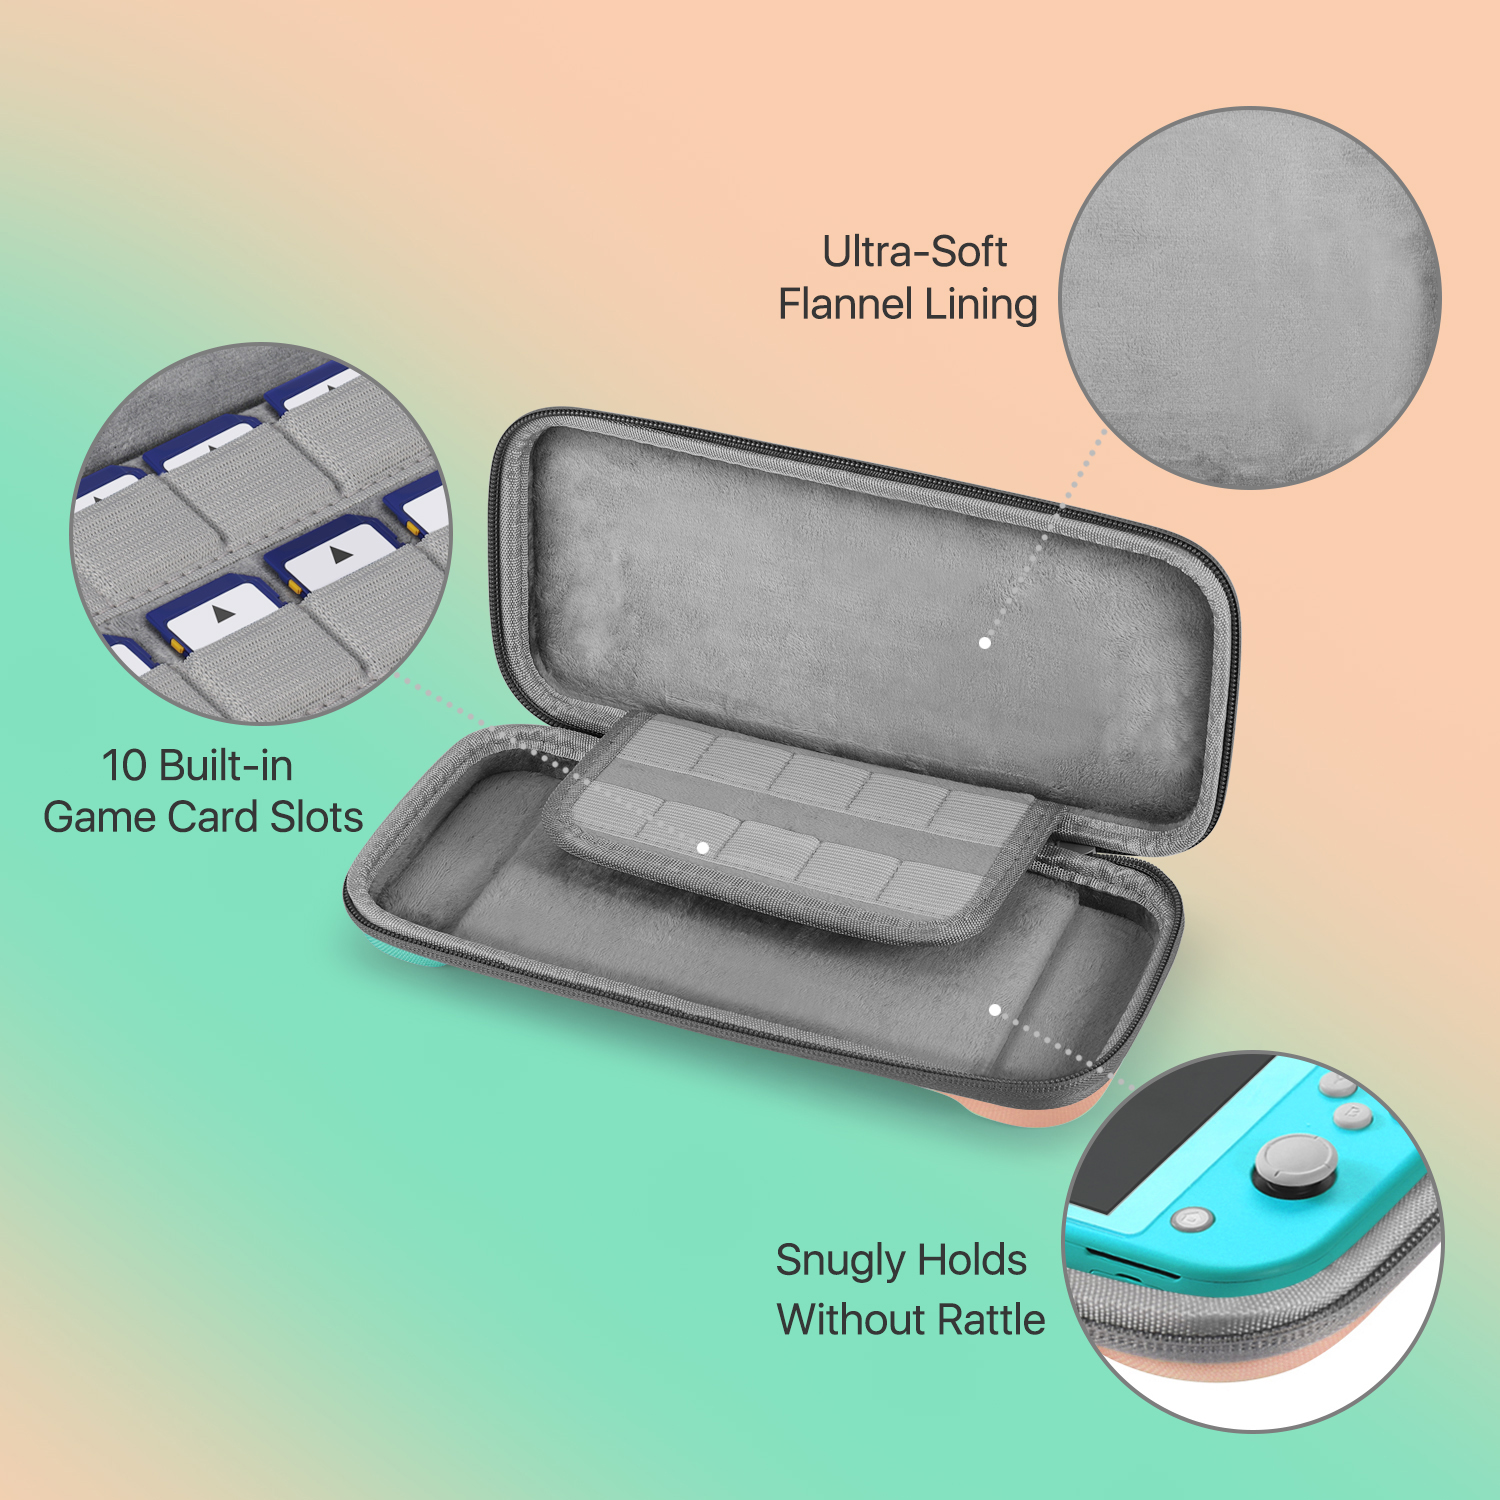 Durable And Sturdy Case For Switch - Hard EVA shell covered with wearable oxford fabric, soft flap divider, and protective cushioning layers that protects Nintendo Switch Lite against dust and debris; Inner soft velvet/flannel lining adds a comfortable touch, ensuring your touchscreen remains clean and safe from scratches